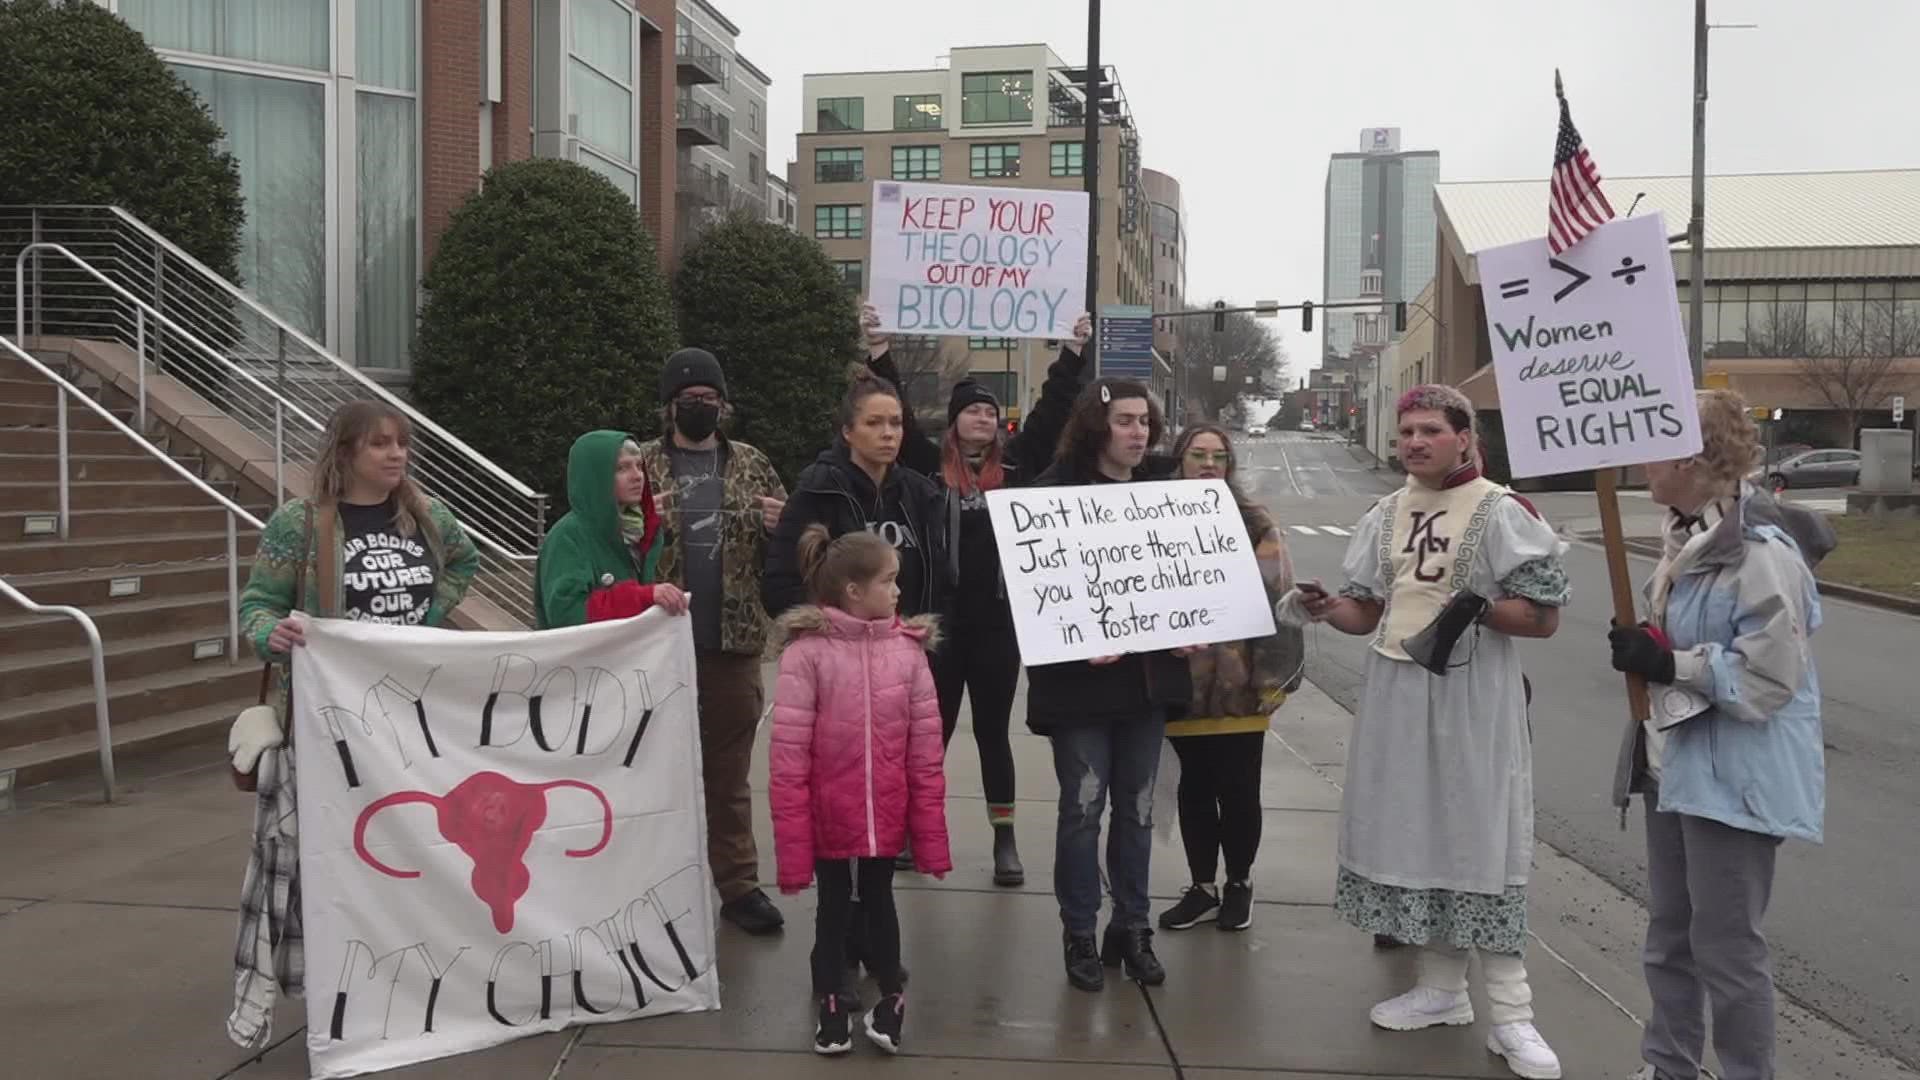 Hundreds marched in Knoxville to commemorate the reversal of Roe v. Wade. The annual event used to be a protest against abortion, but this year attendees celebrated.